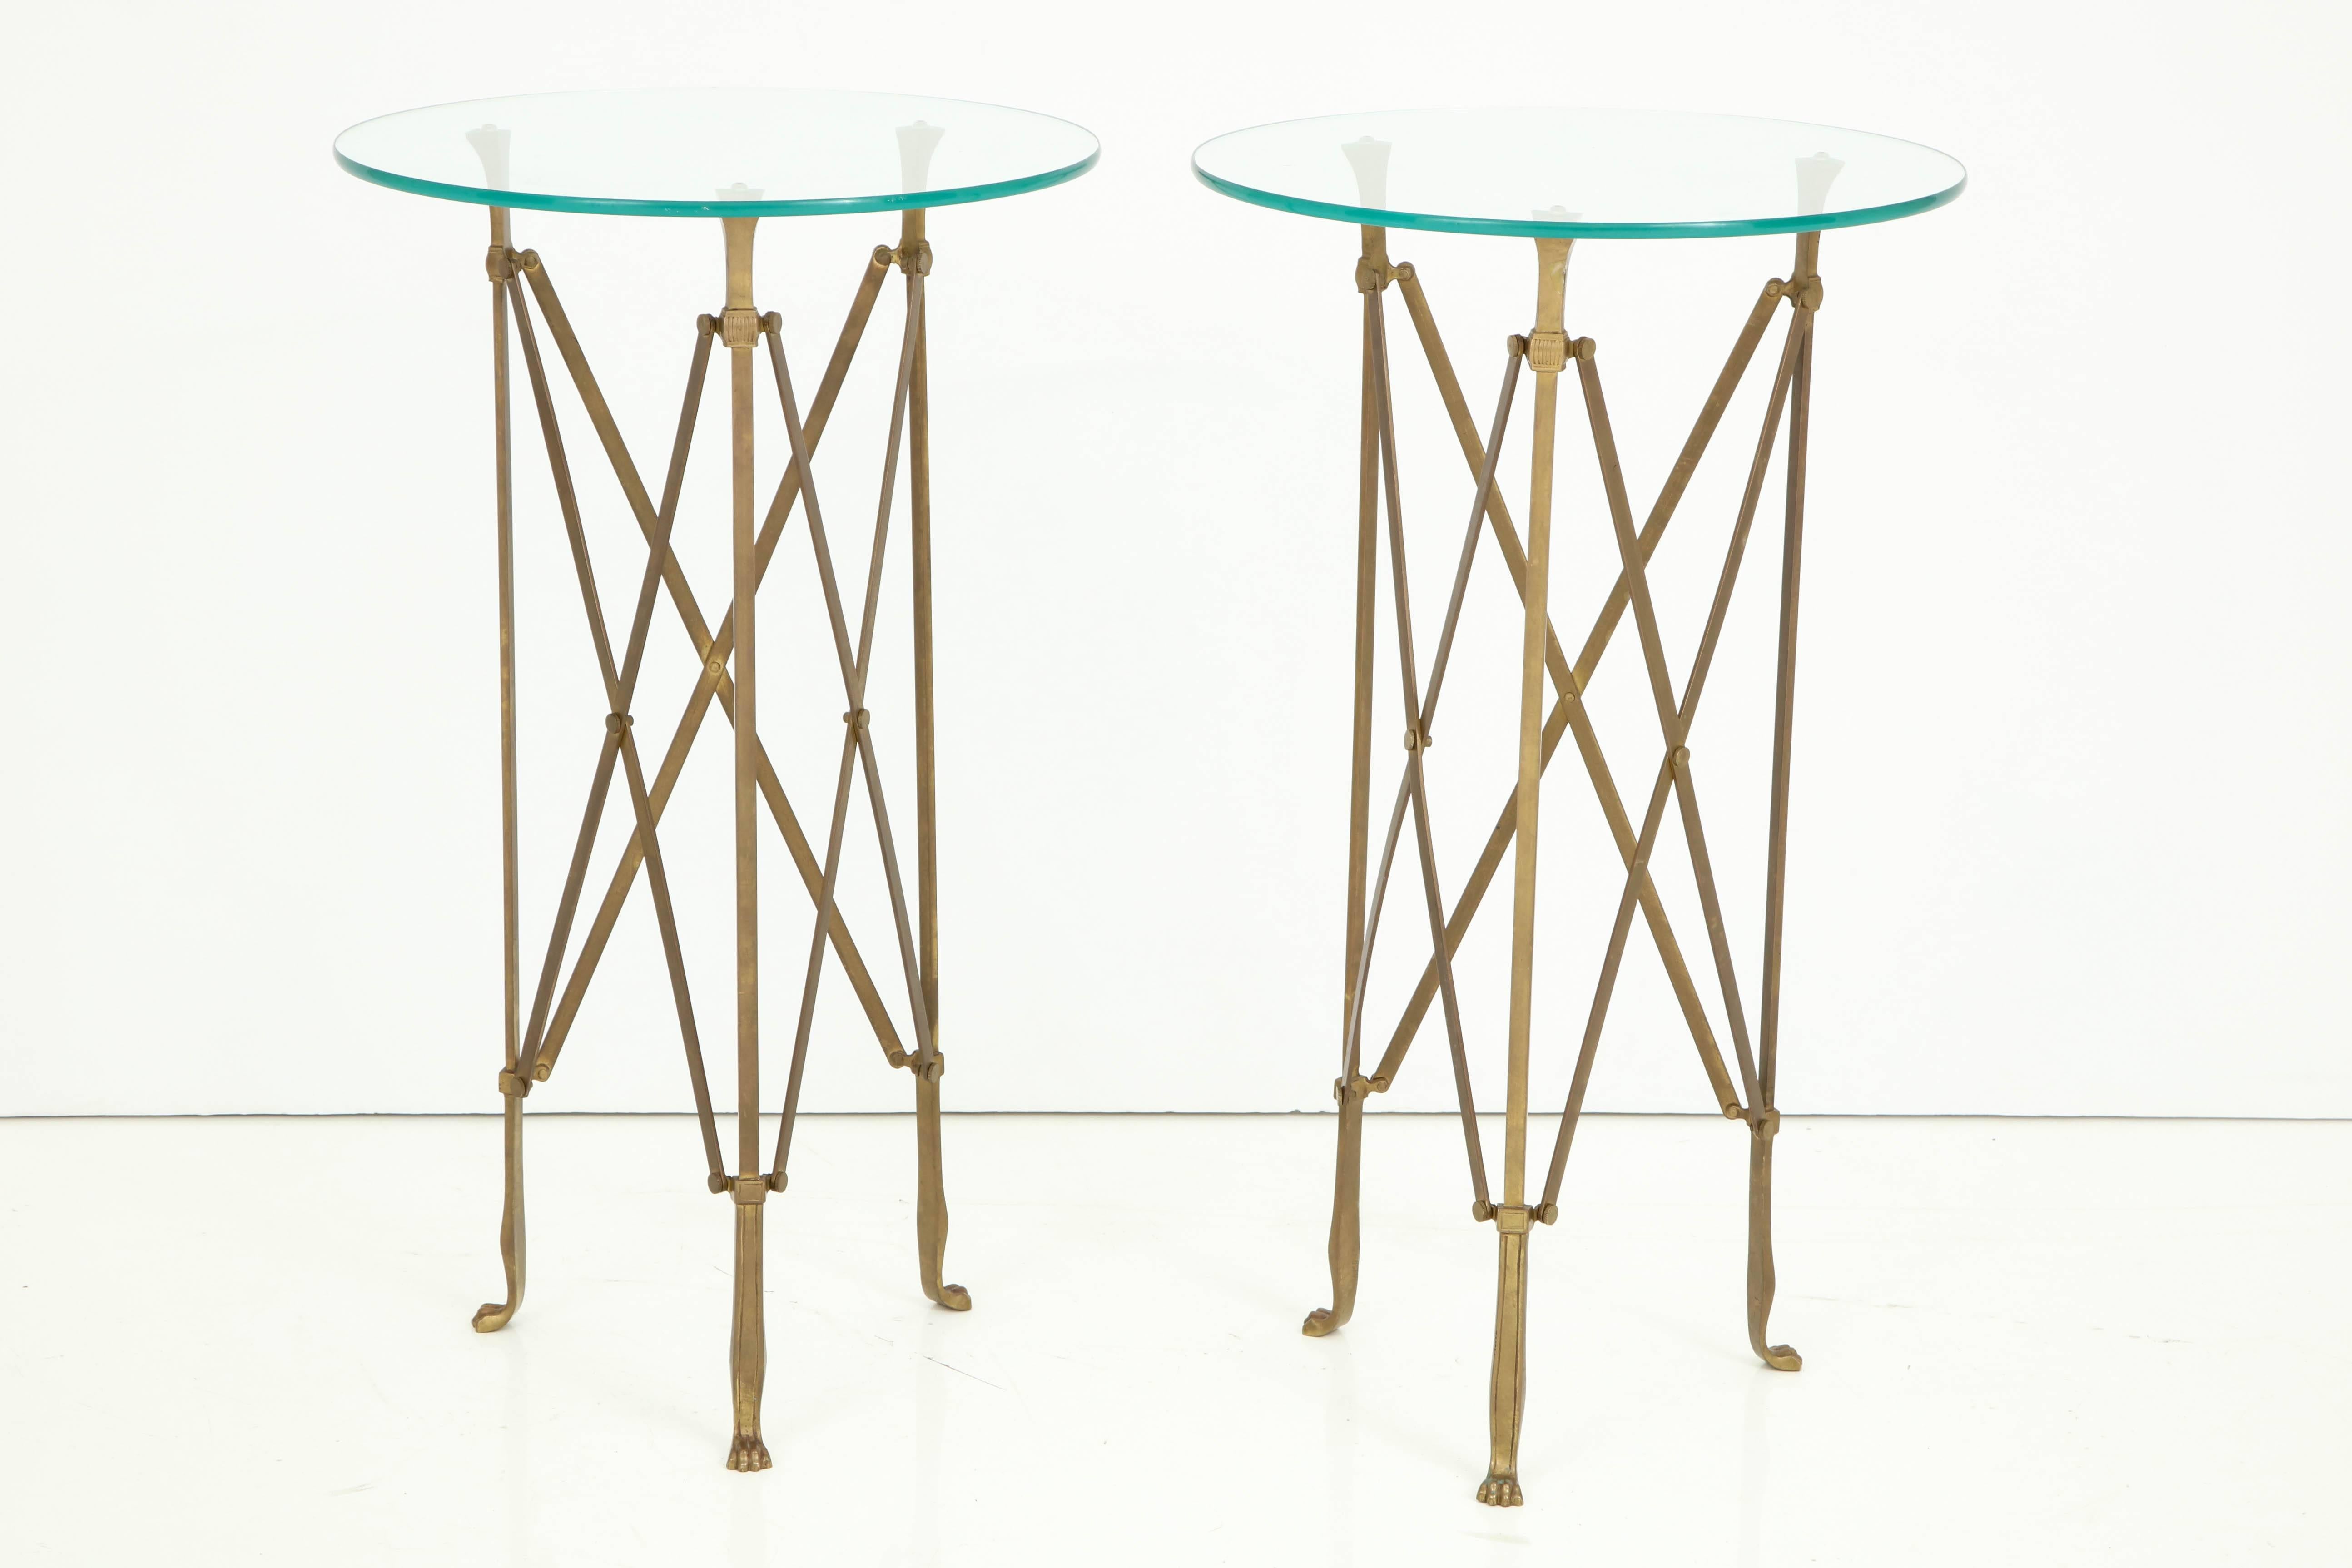 A pair of well proportioned neoclassical side tables in bronze, attributed to Jansen. The glass tops came with the tables and seem original but thicker glass or stone tops can be accommodated.